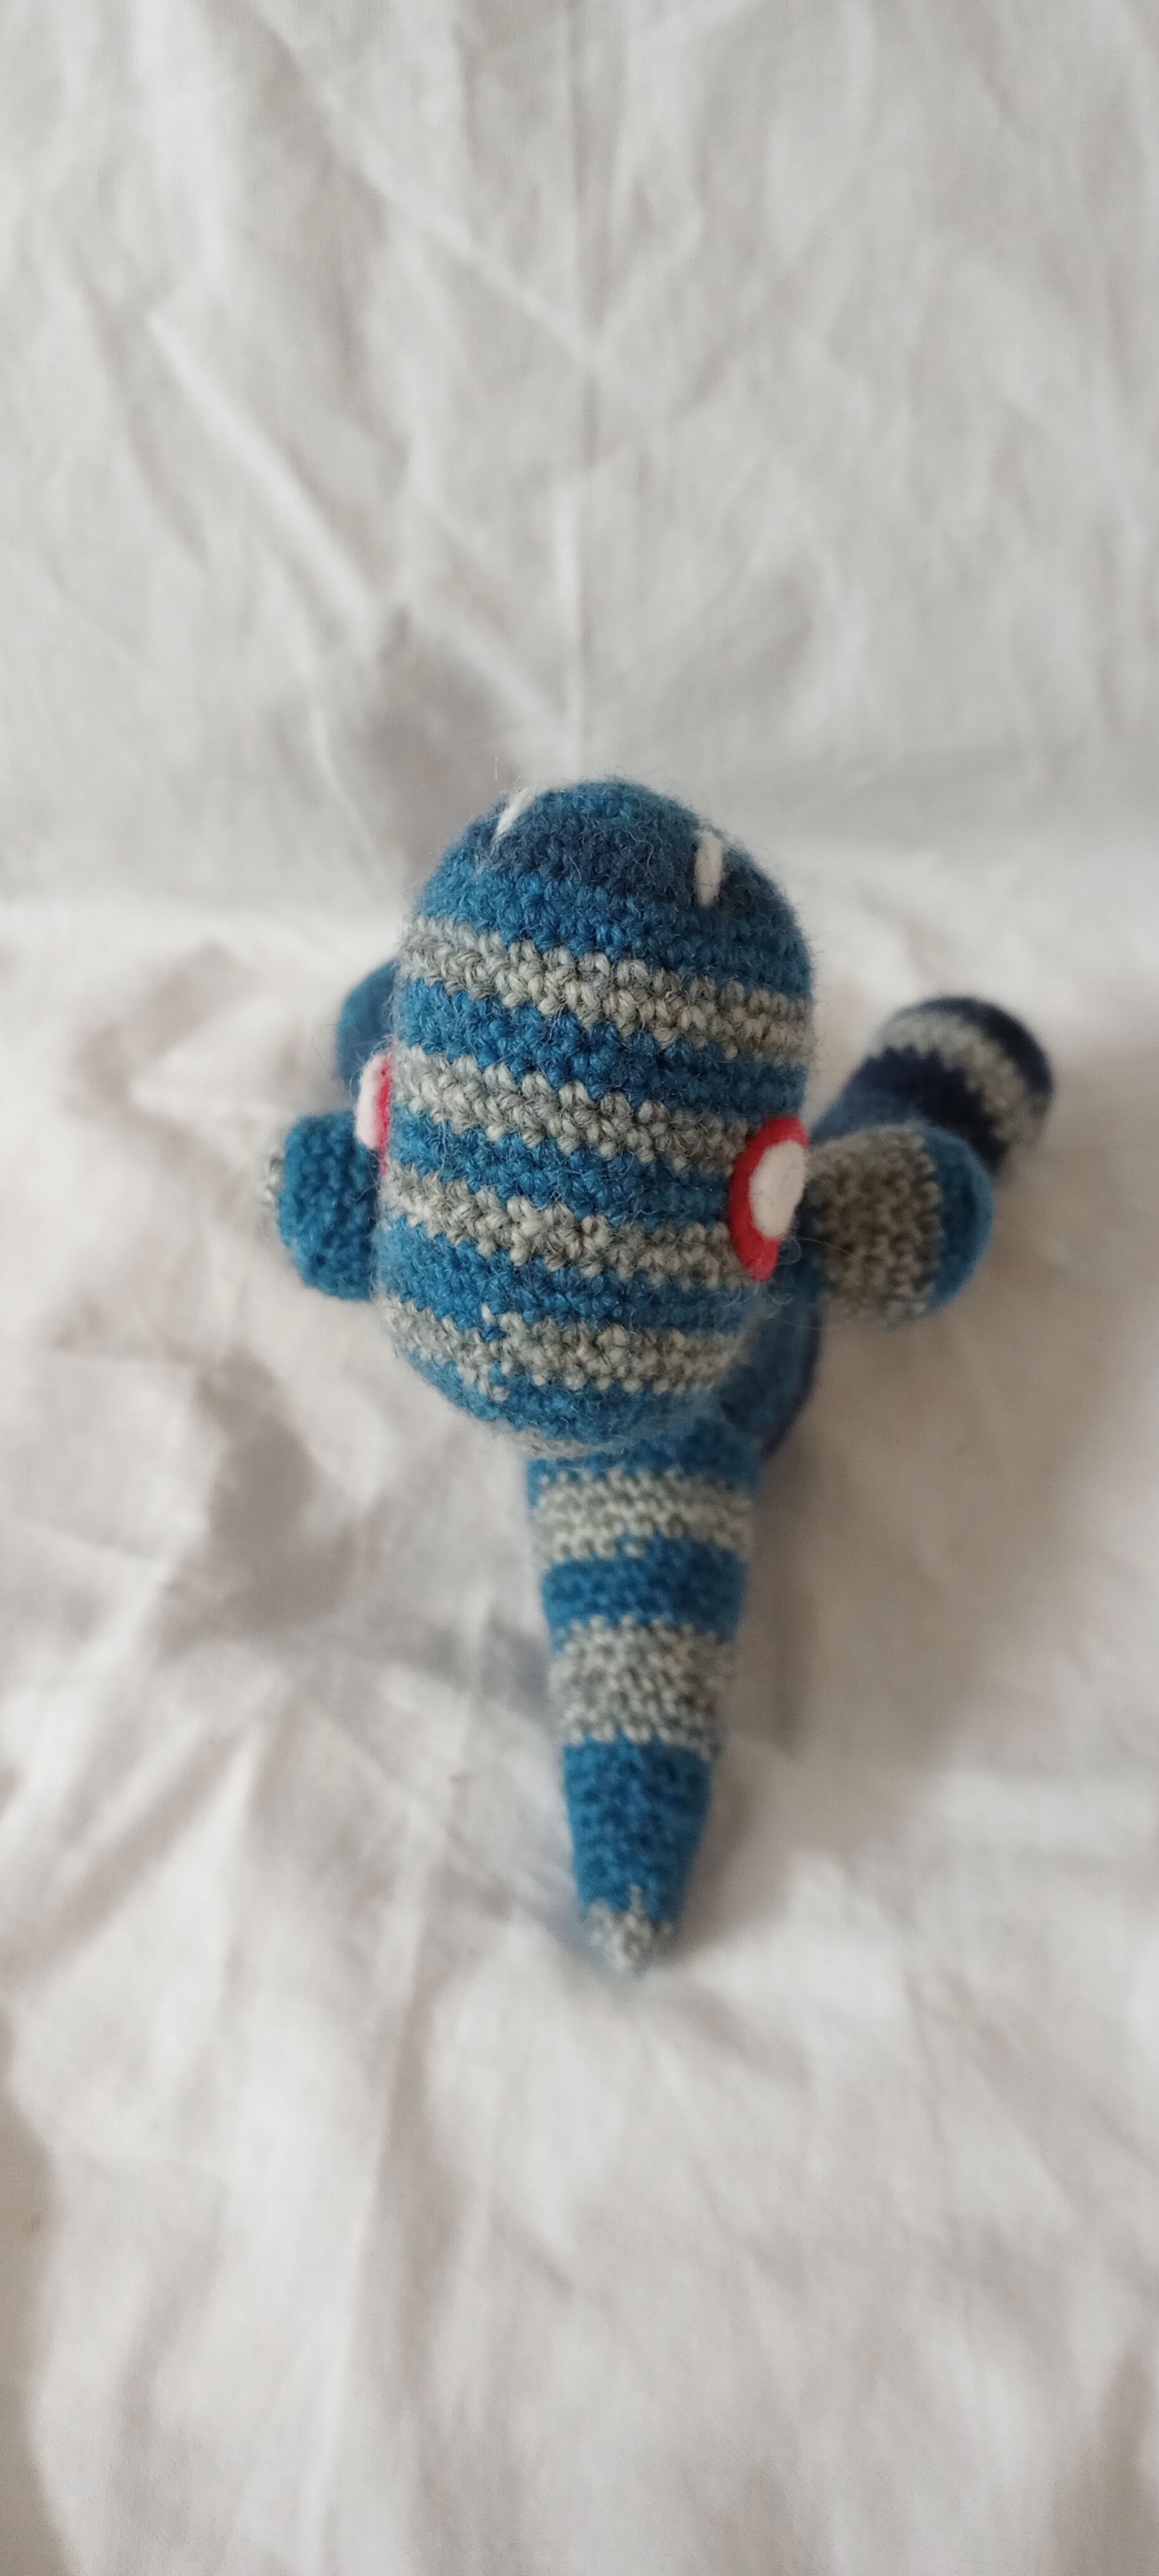 Blue and Grey Striped Rexy the Cuddly Dinosaur